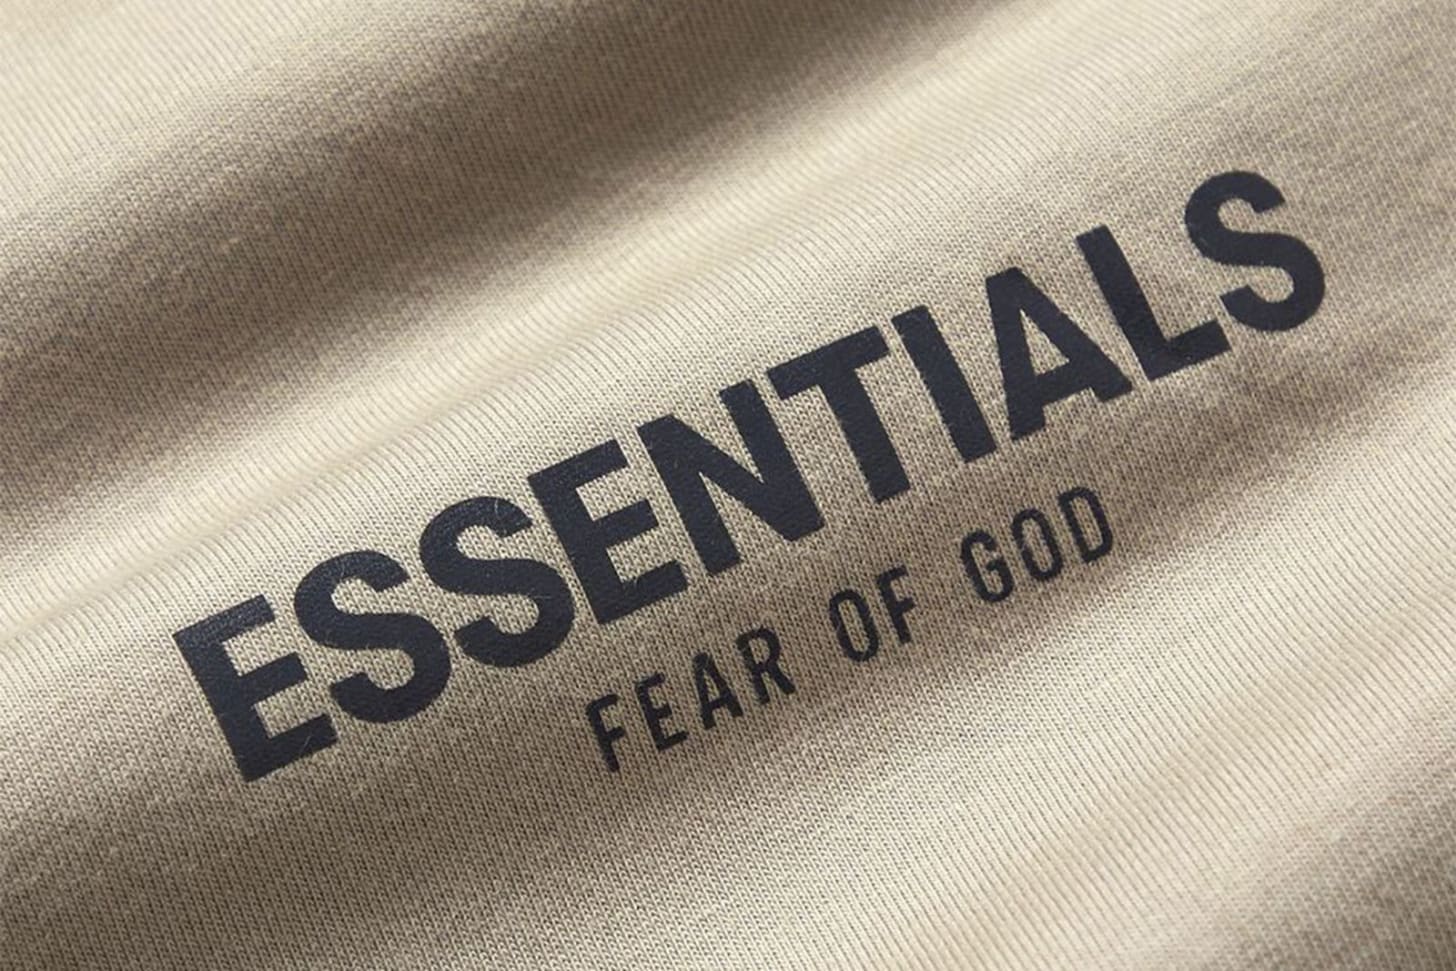 Shop the Exclusive Fear of God Collection at MR PORTER Here